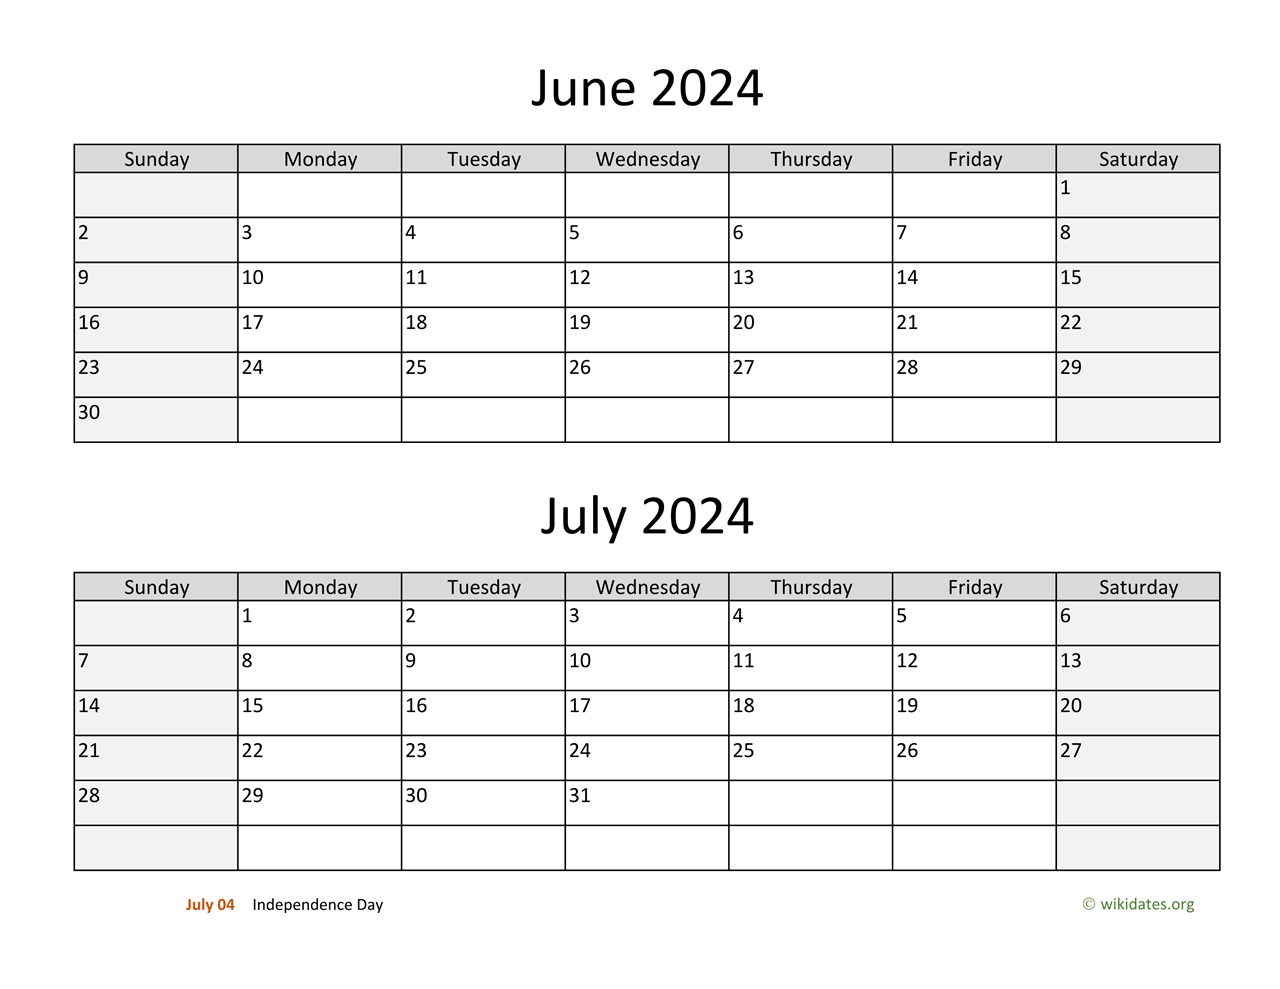 June And July 2024 Calendar | Wikidates for Printable Calendar 2024 June And July